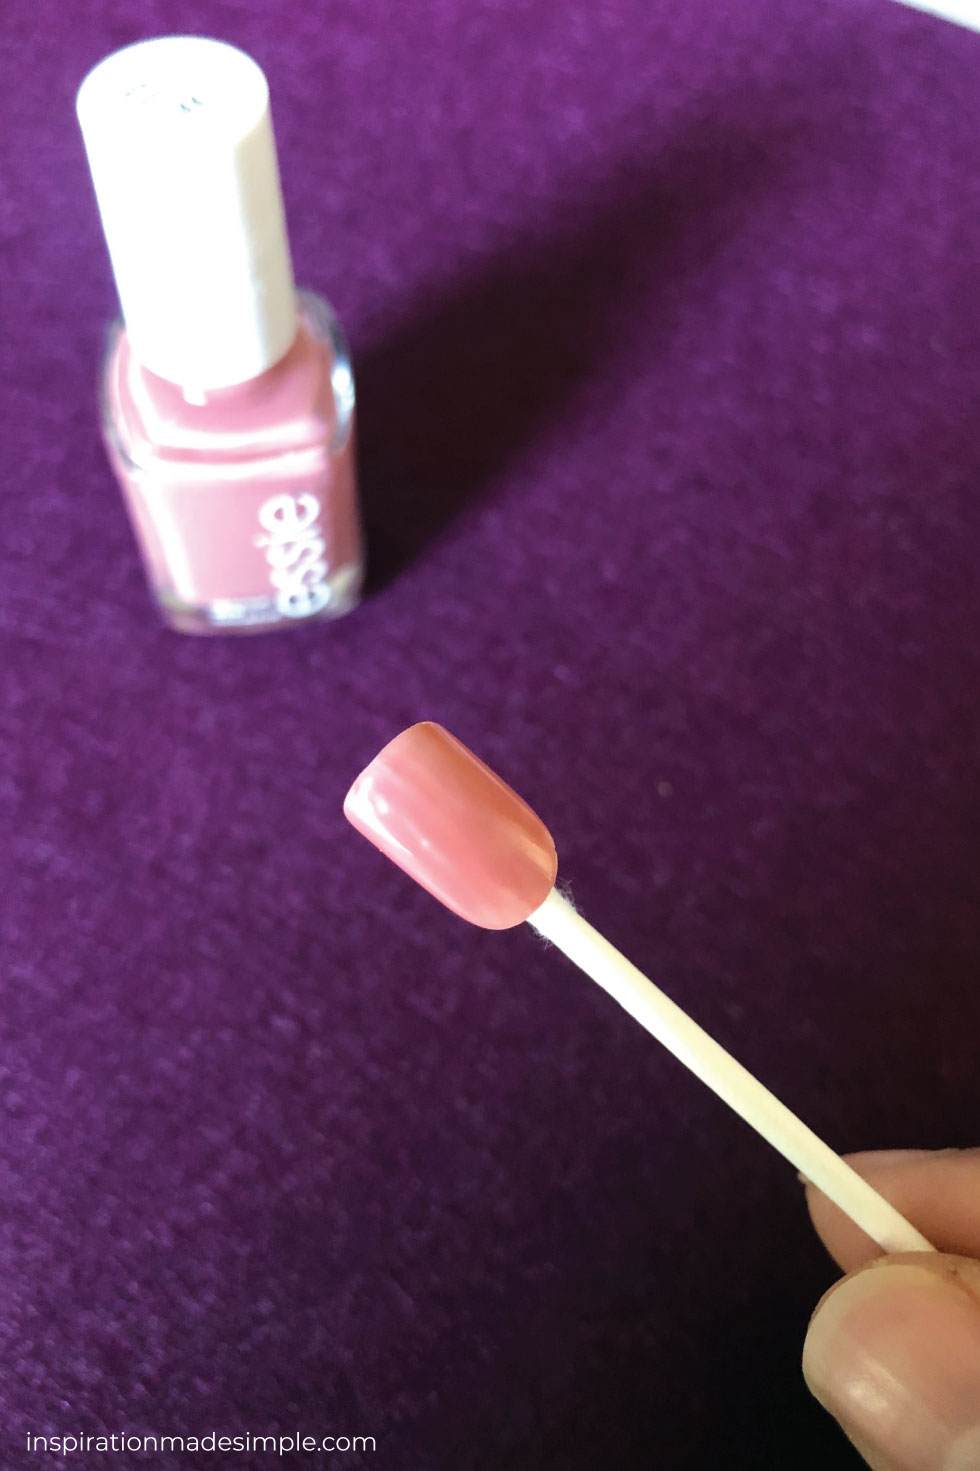 Painting Glue-on Nails Yes You Can - Inspiration Made Simple